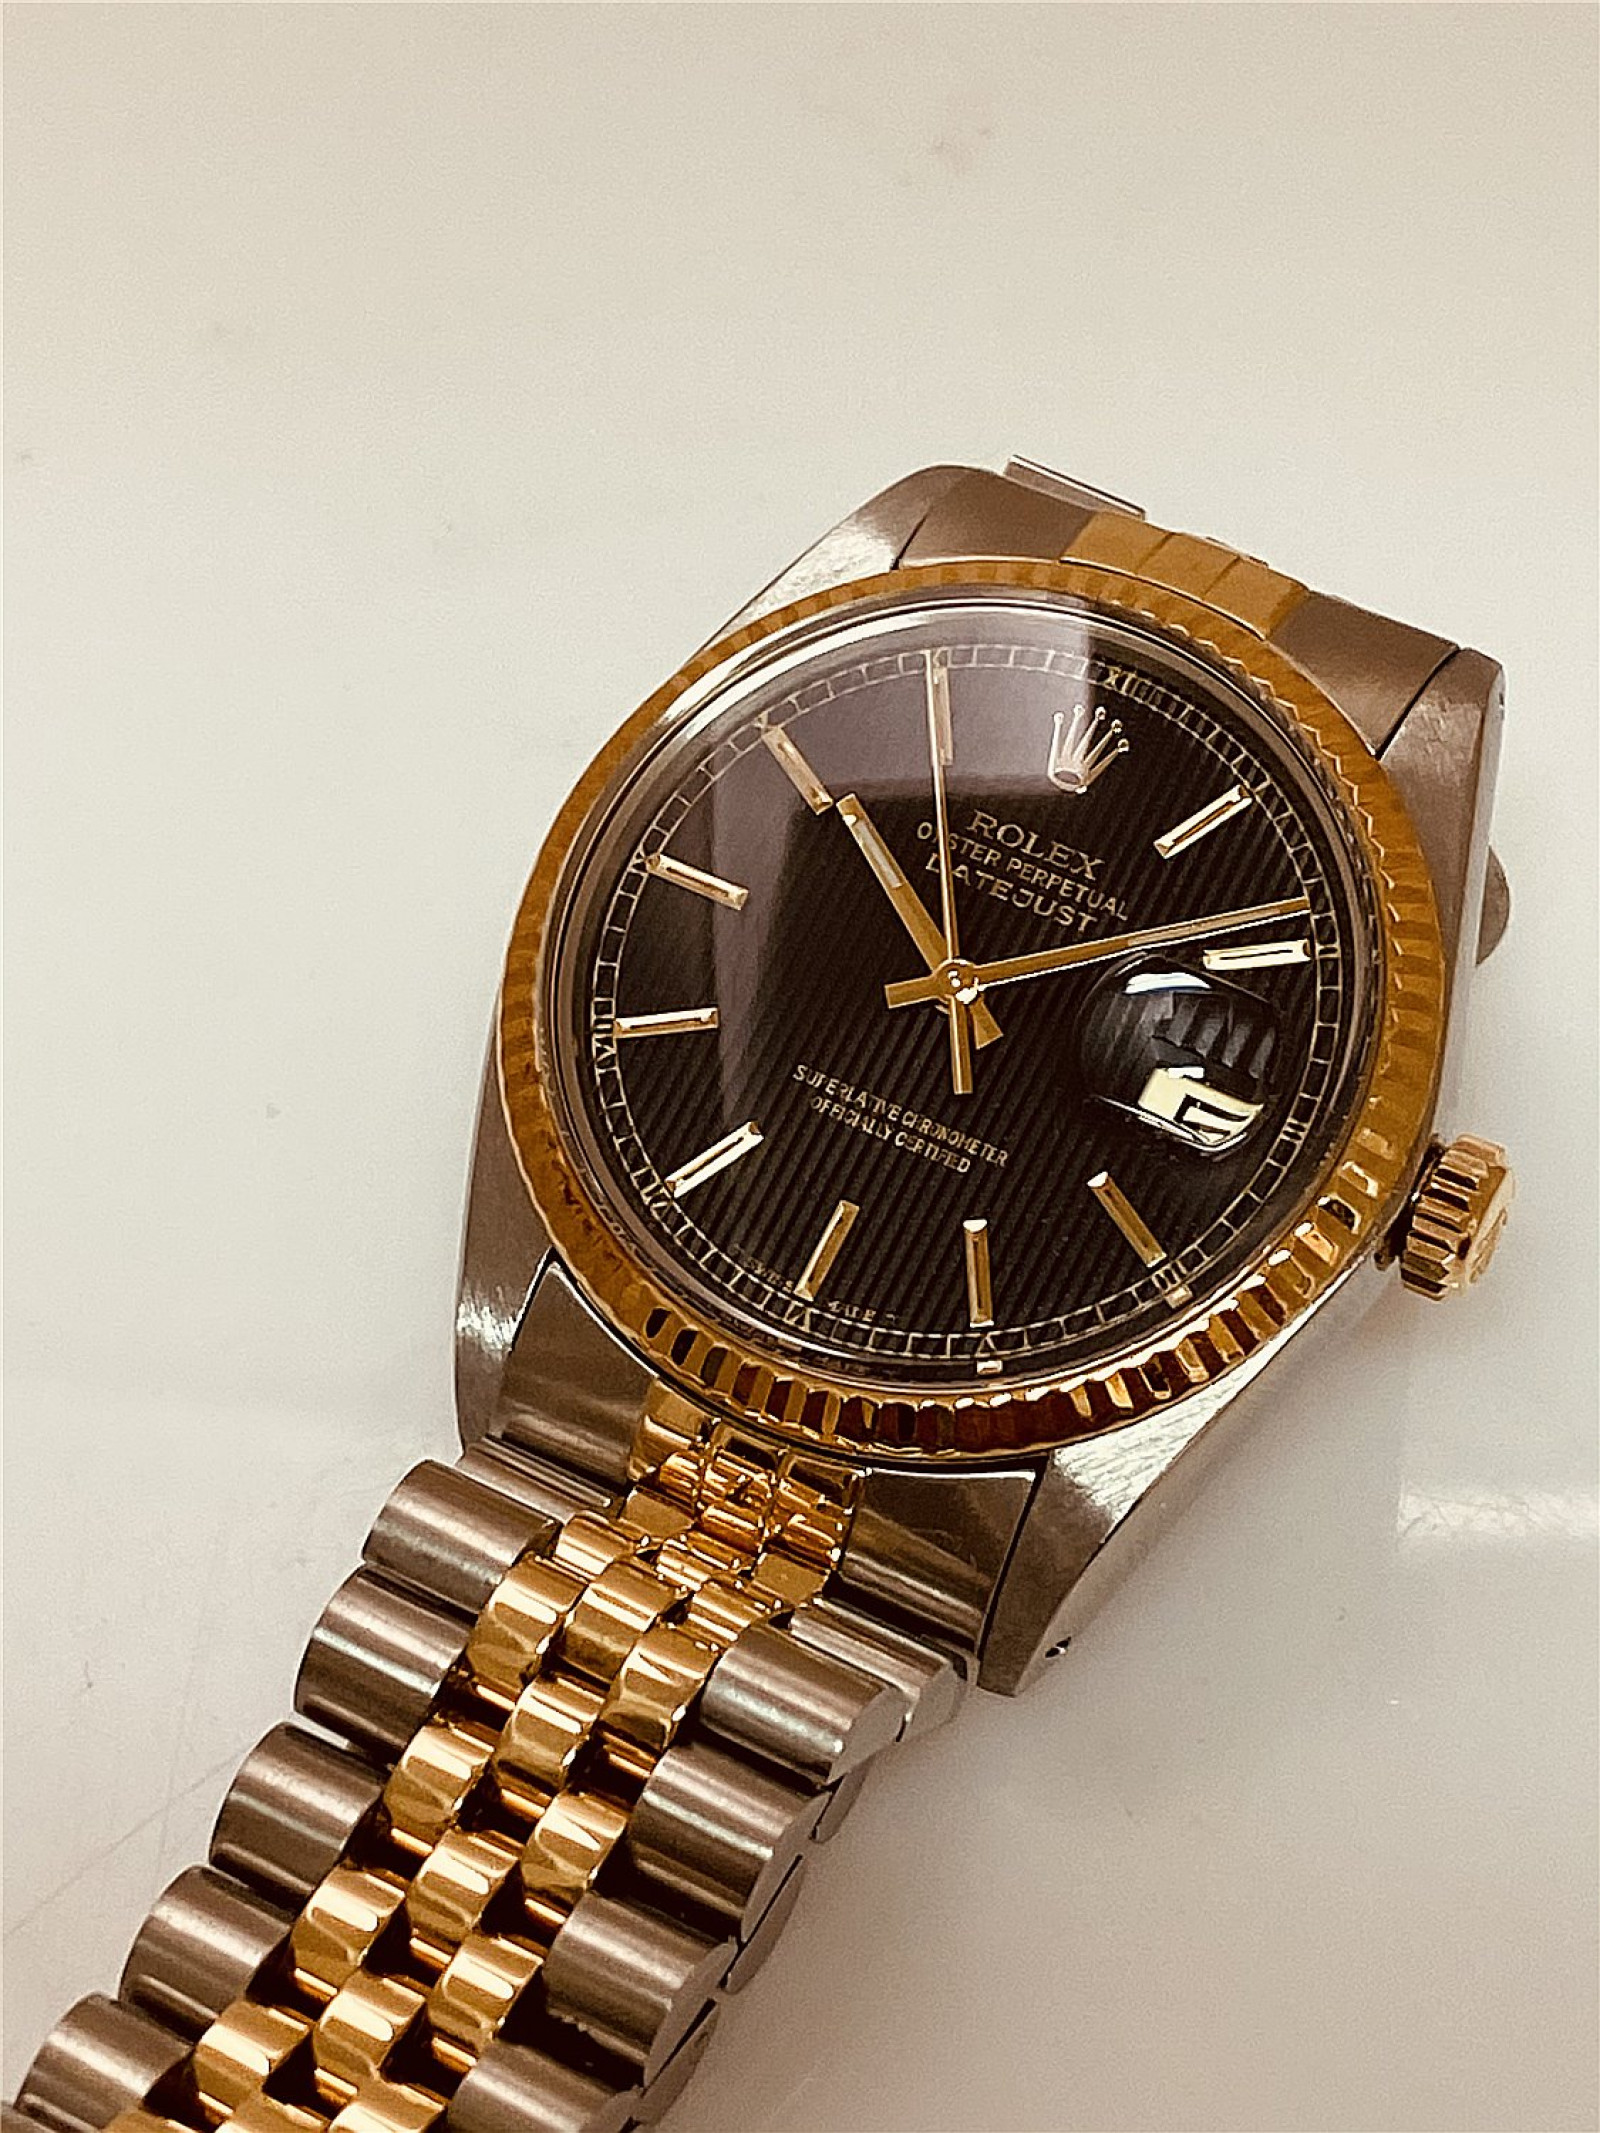 Rolex Datejust Ref. 16013 with Tapestry Dial